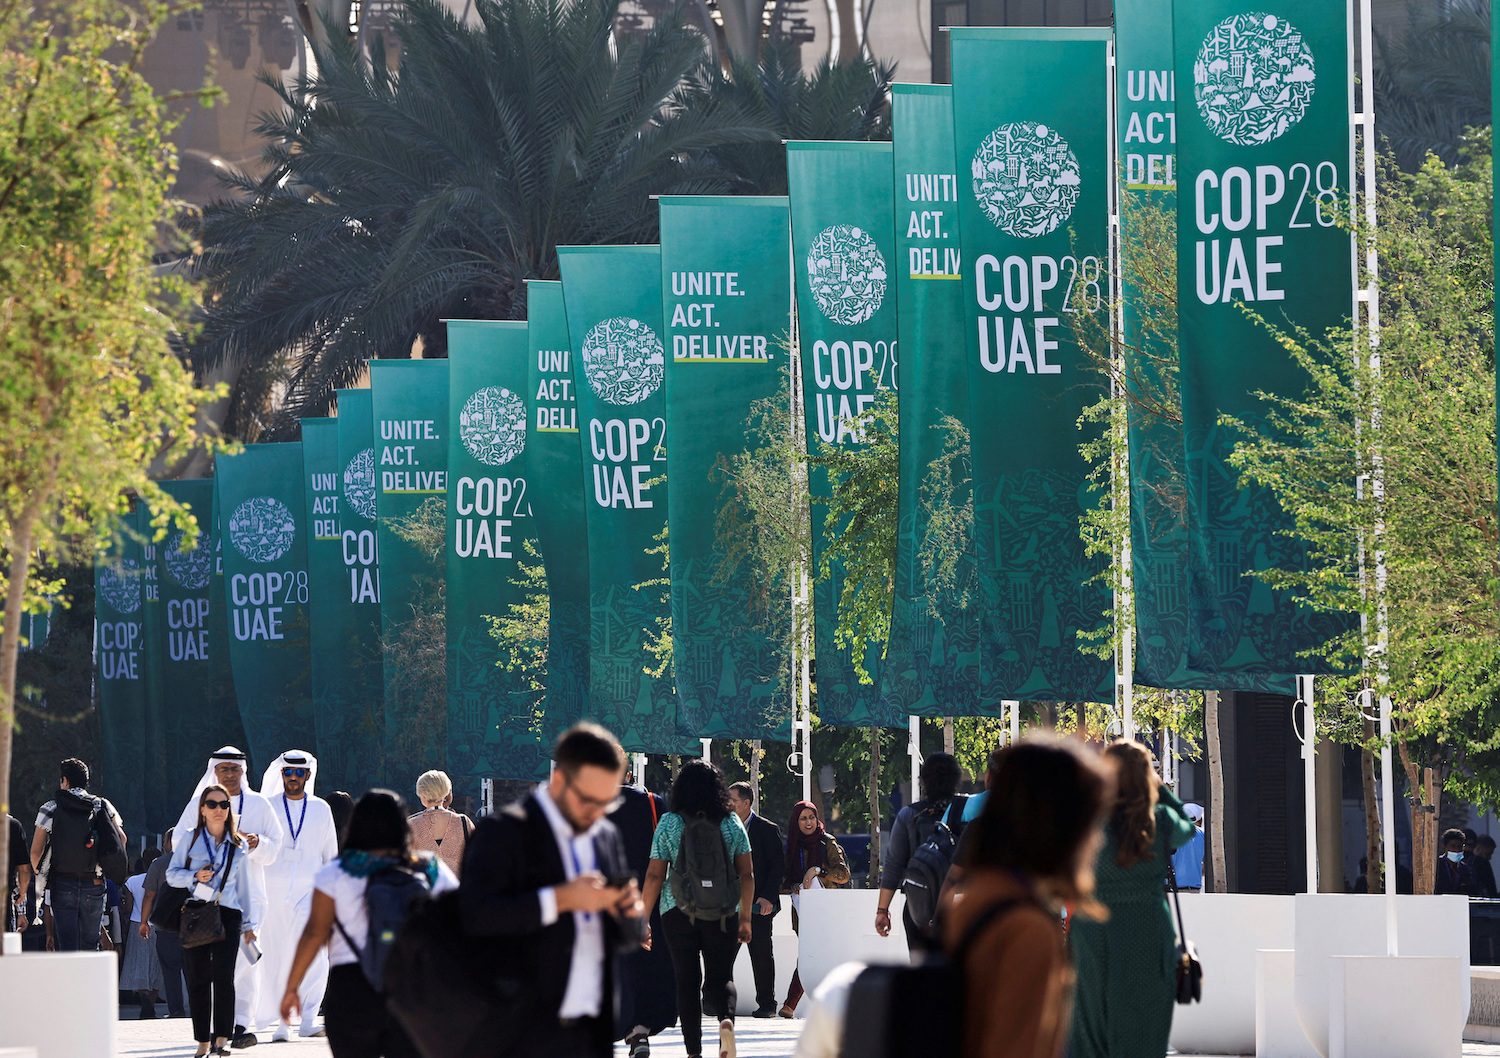 COP28 considers end to fossil fuels in move opposed by OPEC